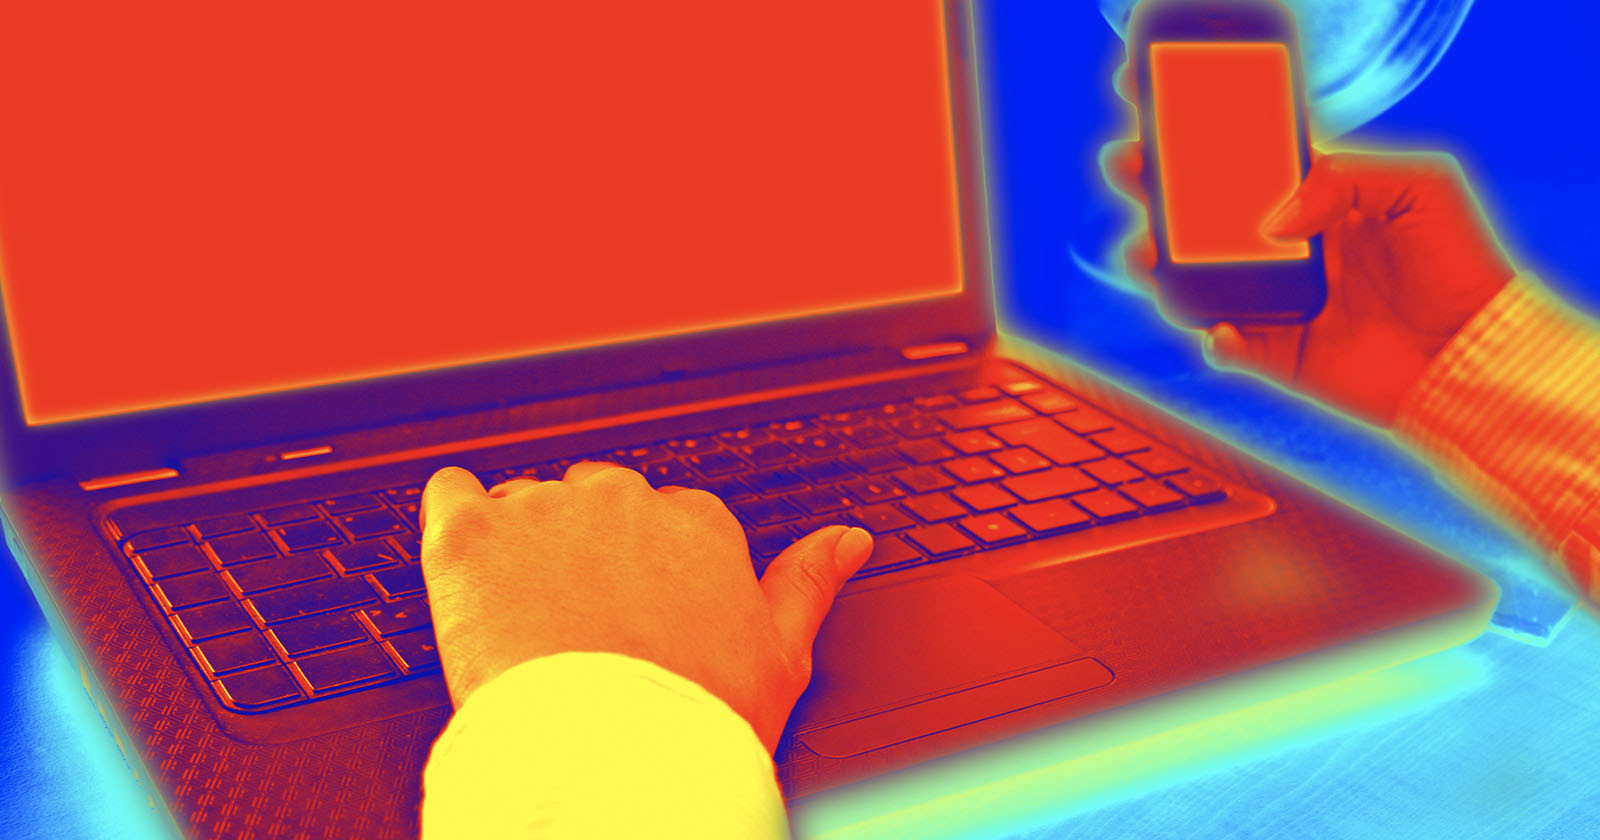  thermal cameras can used crack passwords 